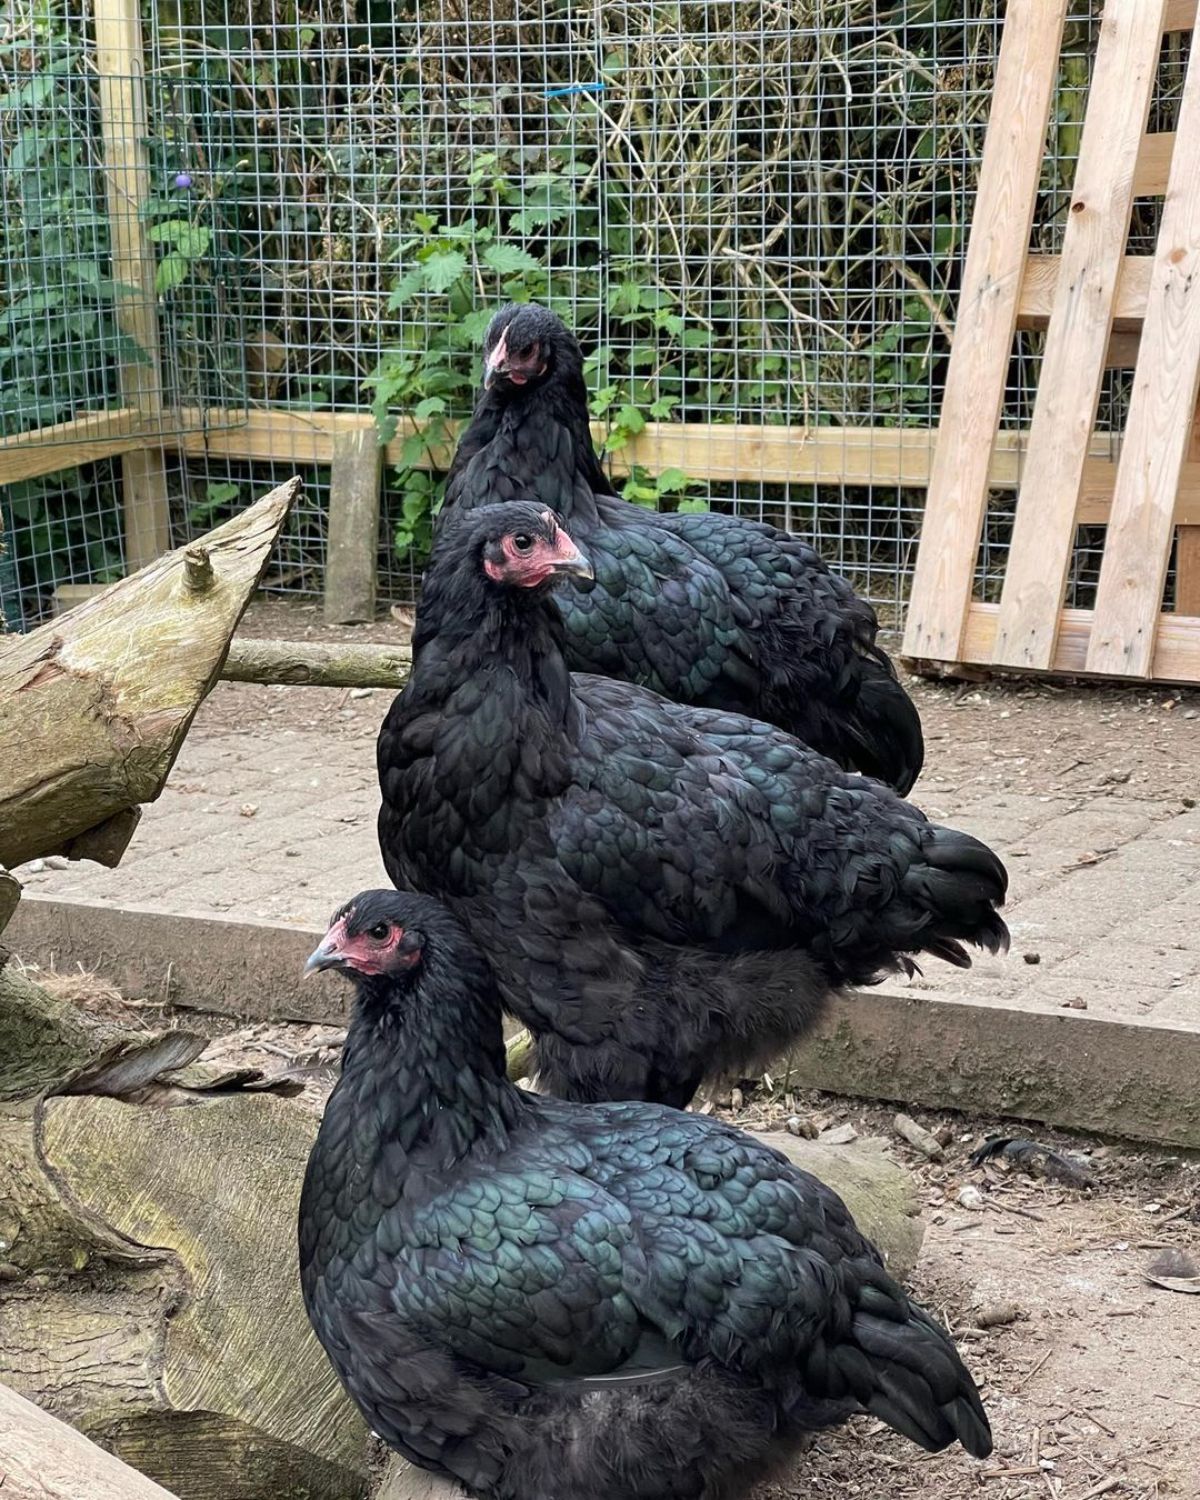 Three adorable Croad Langshan pullets in a backyard.